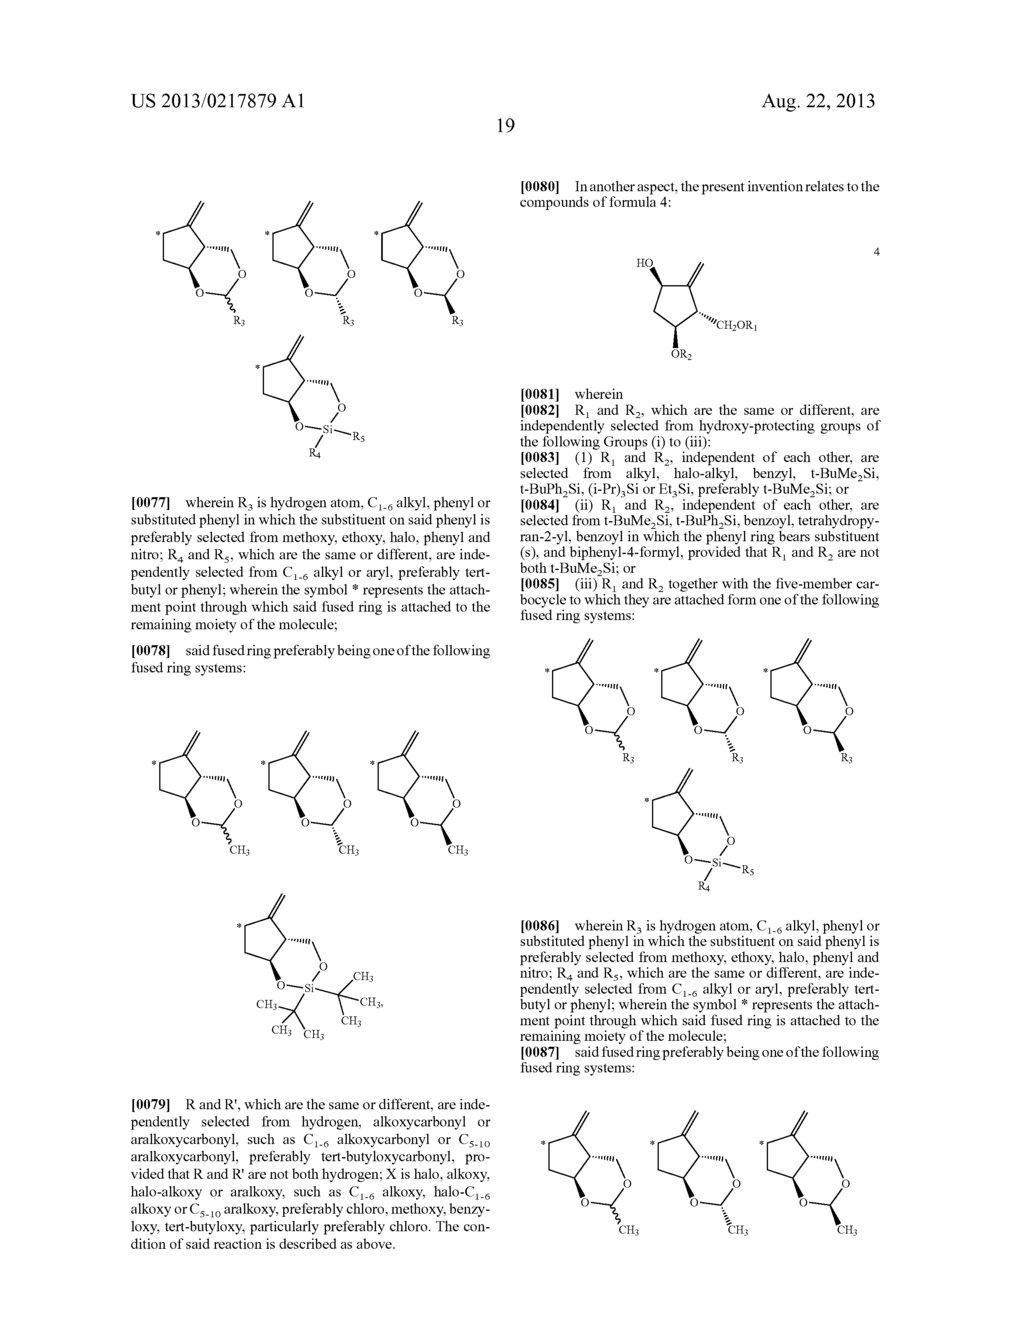 ENTECAVIR SYNTHESIS METHOD AND INTERMEDIATE COMPOUND THEREOF - diagram, schematic, and image 20